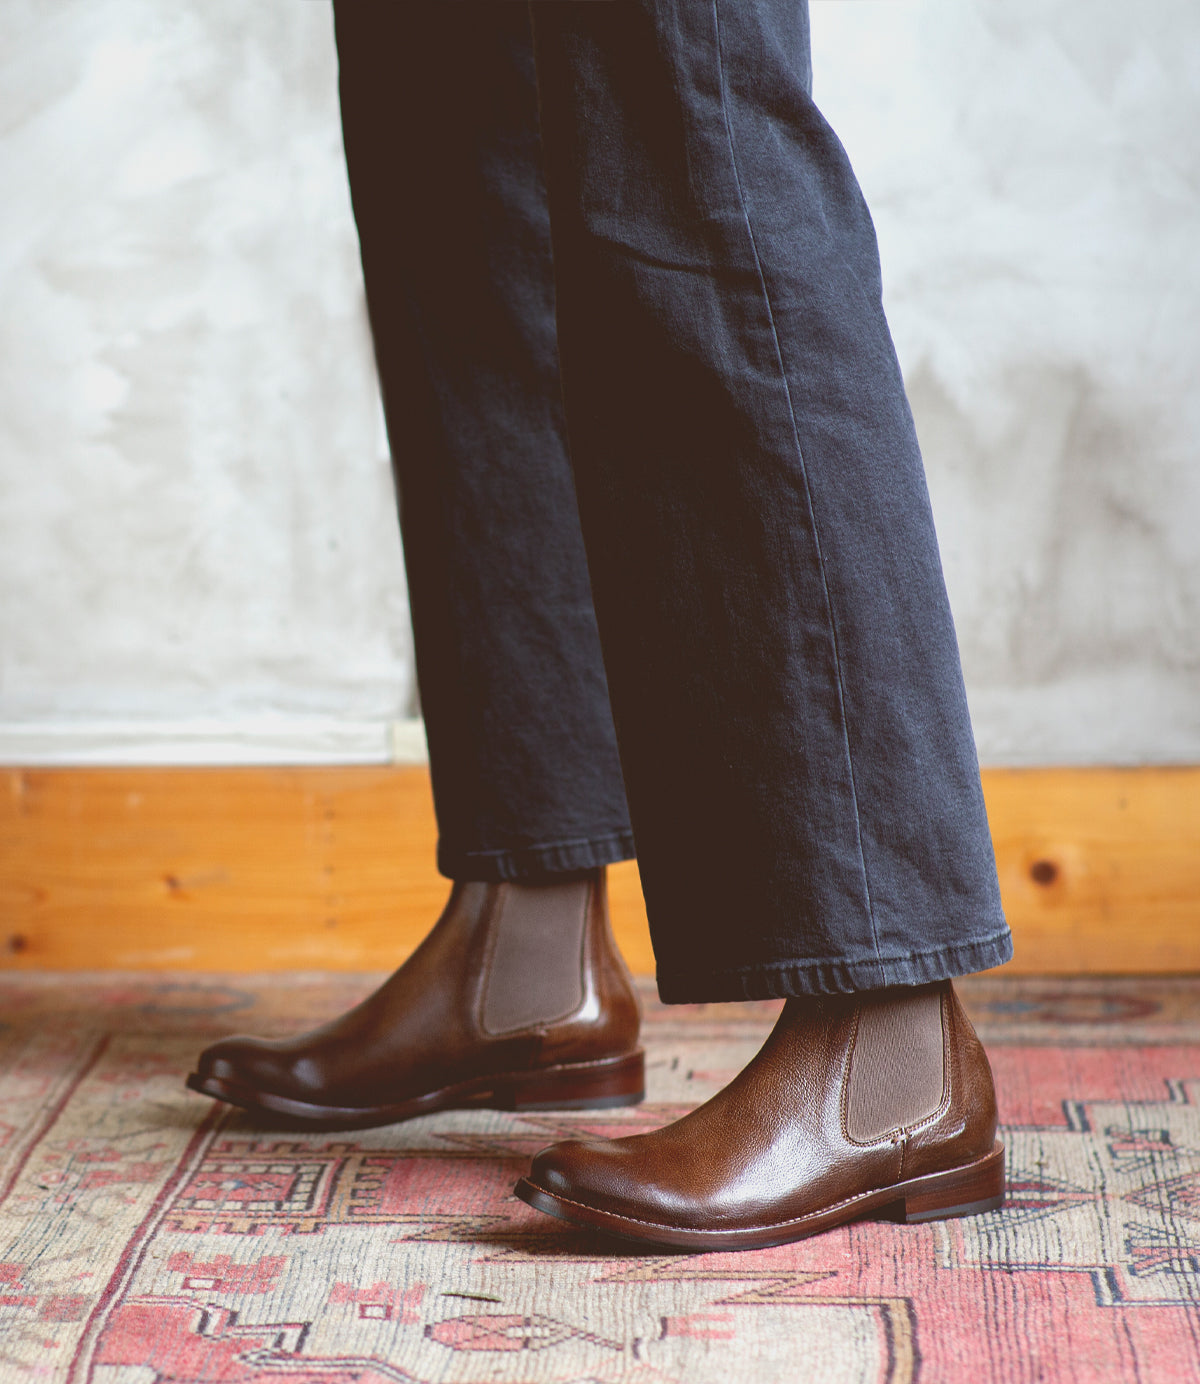 A person standing on a Barfly rug wearing brown Bed Stu Chelsea boots made of Italian leather.